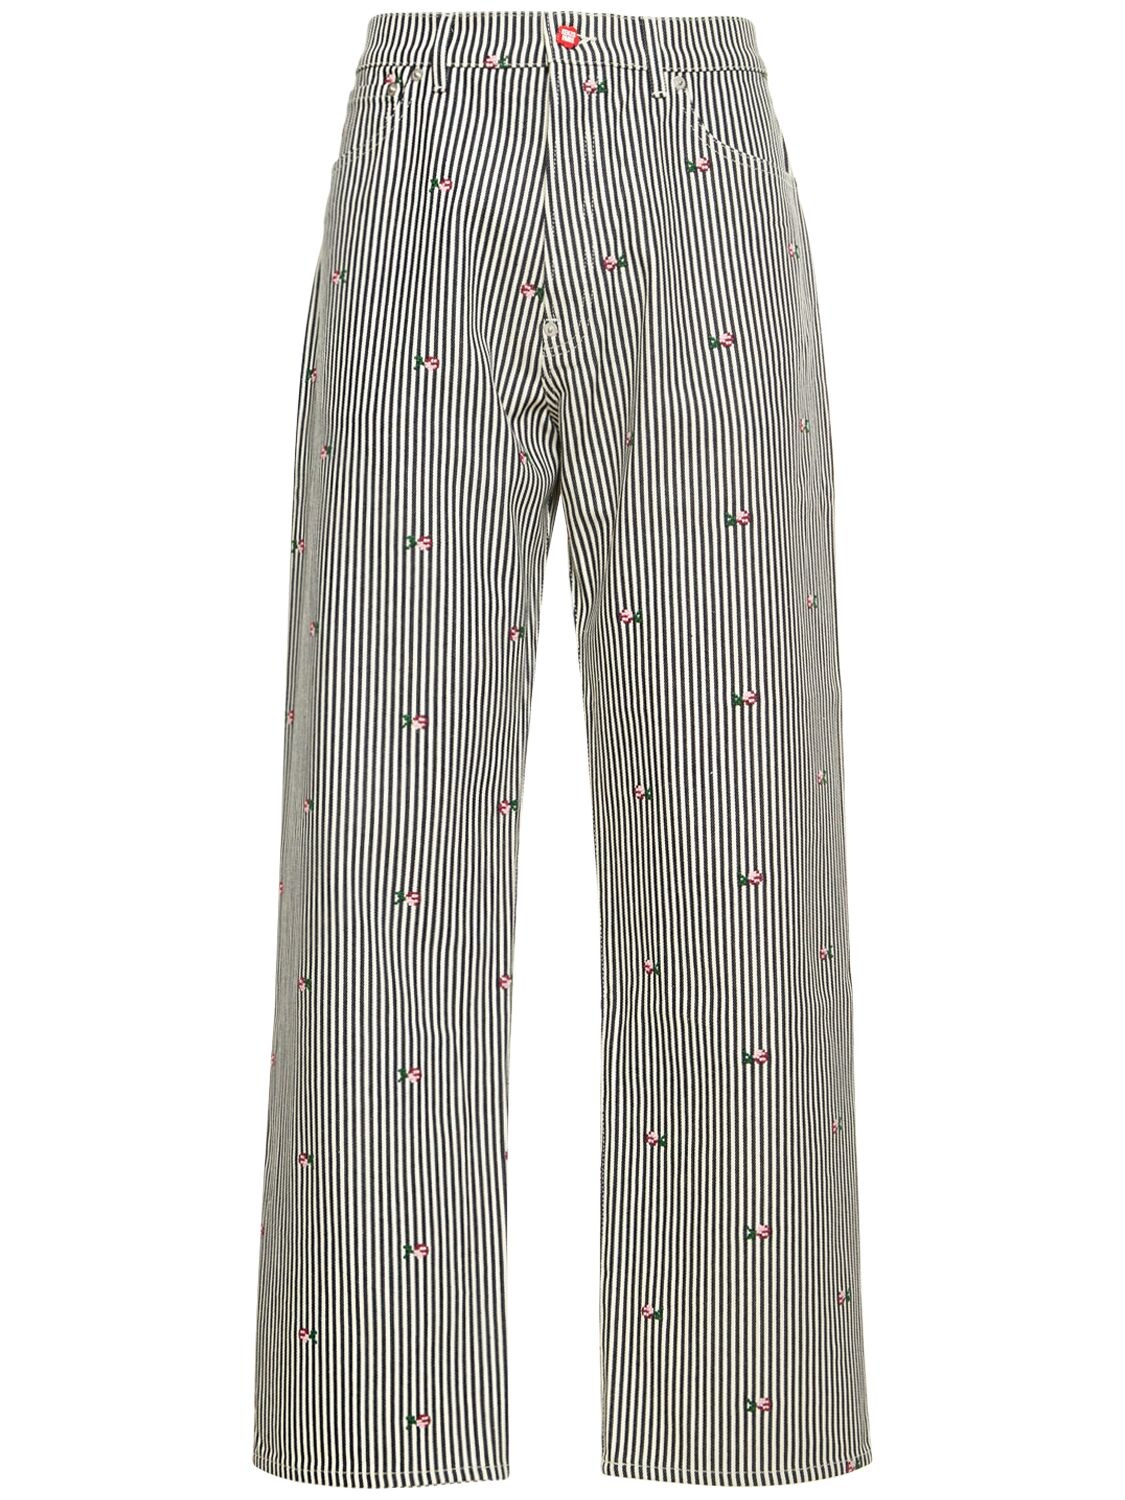 KENZO RELAXED STRIPED COTTON DENIM JEANS